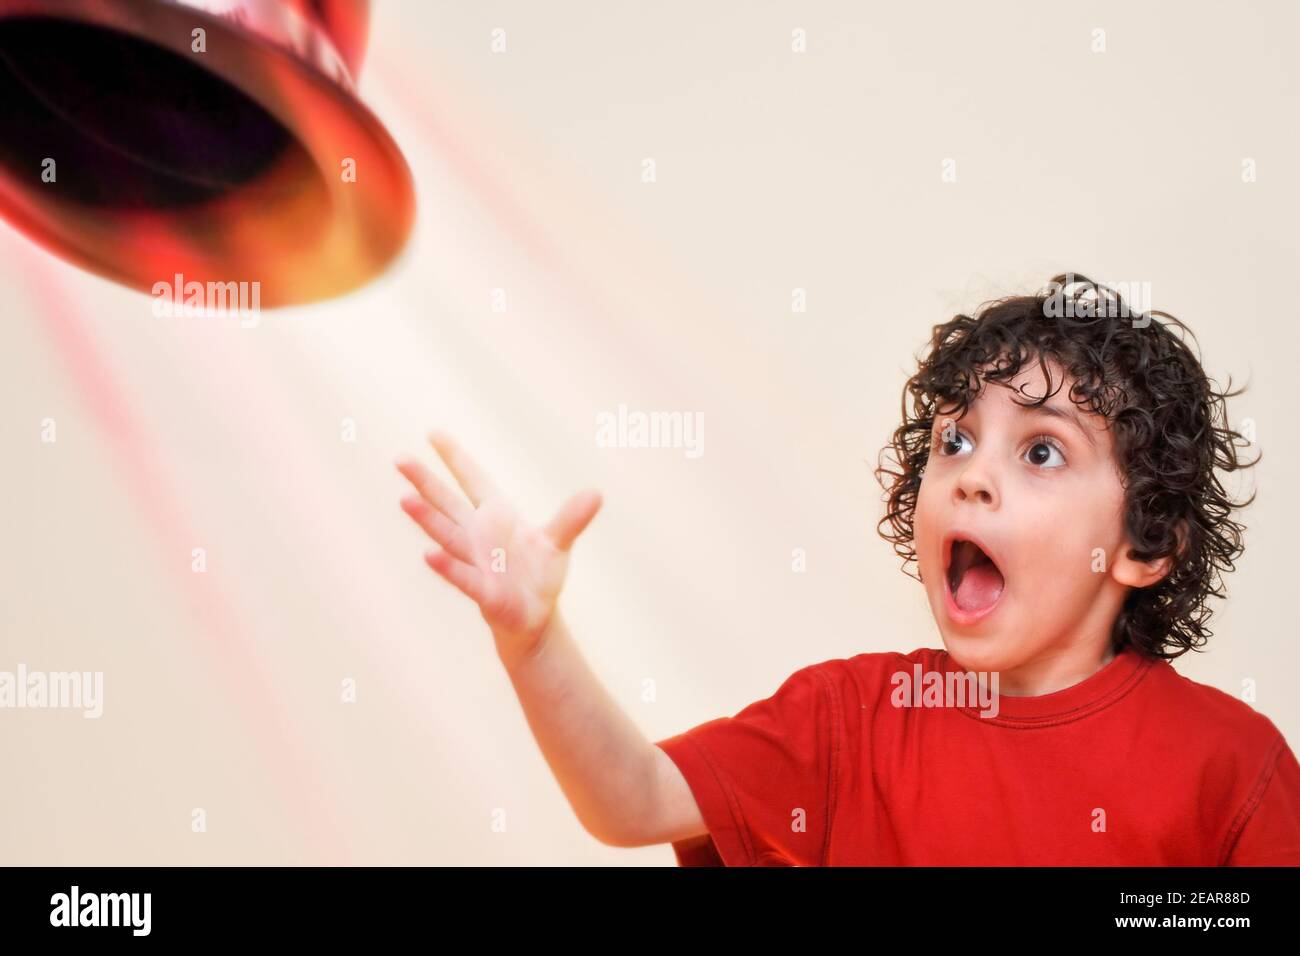 Concept of a surprise Stock Photo